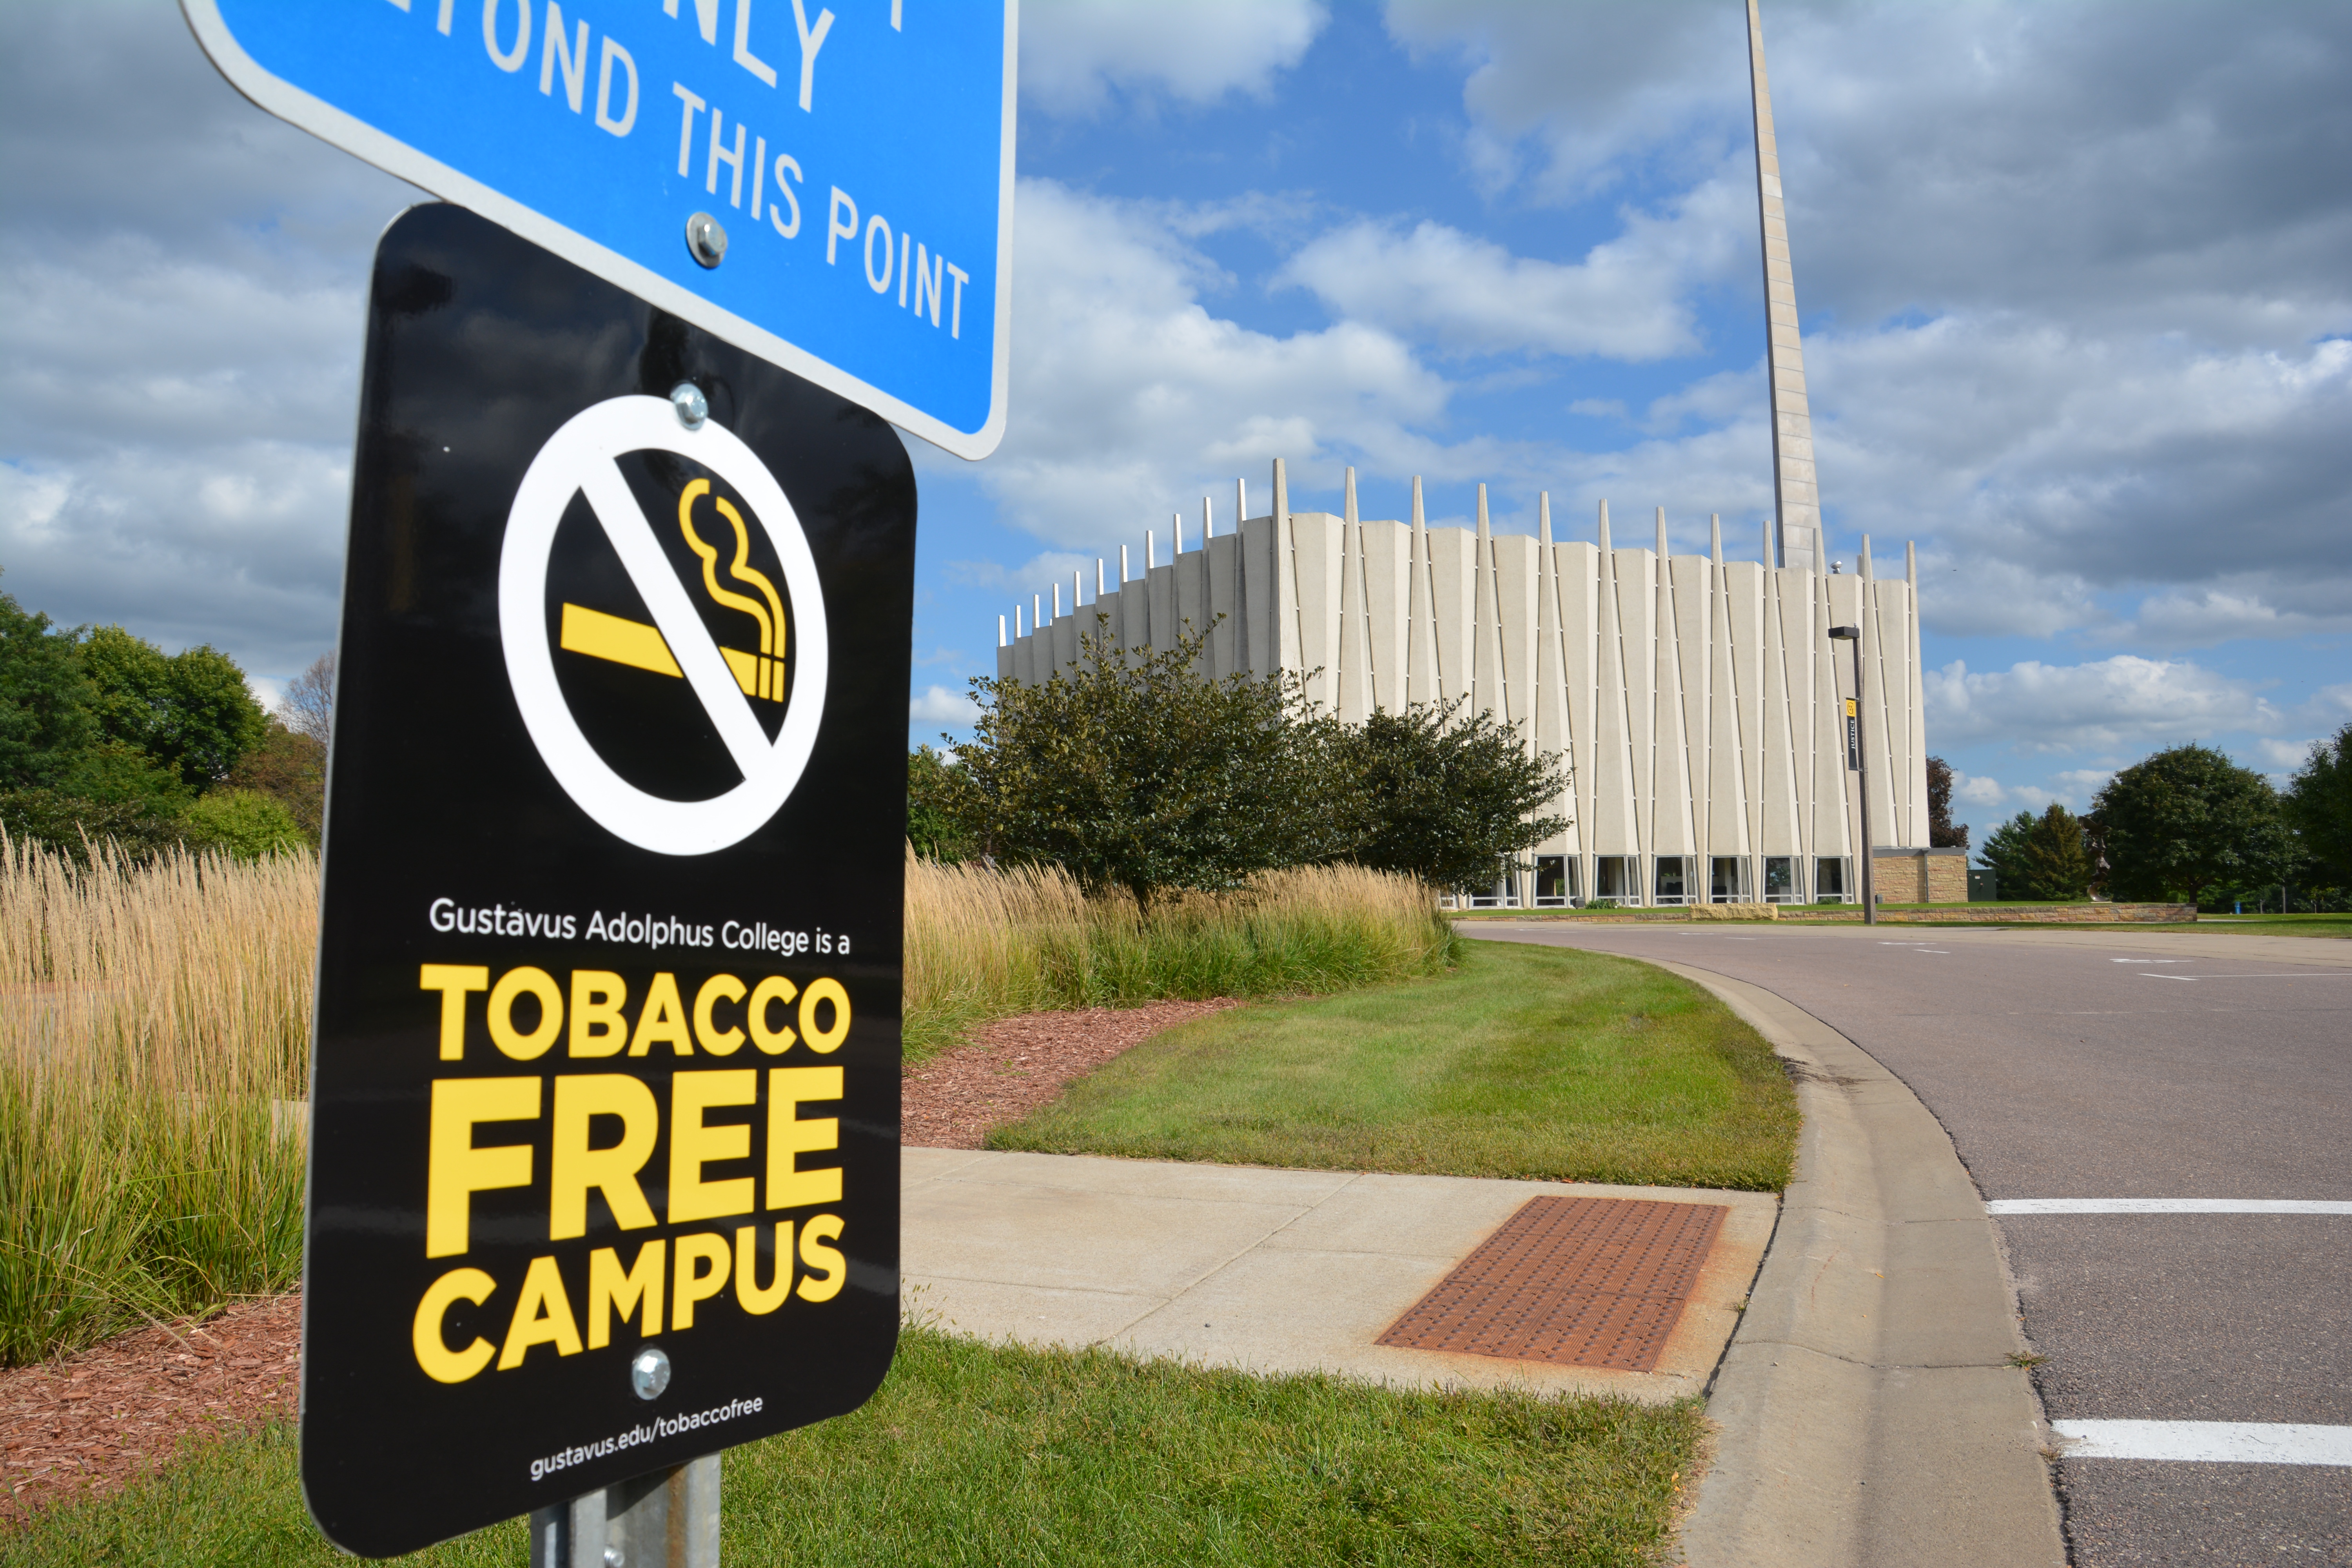 New “No-Smoking” signs can now be found around campus.